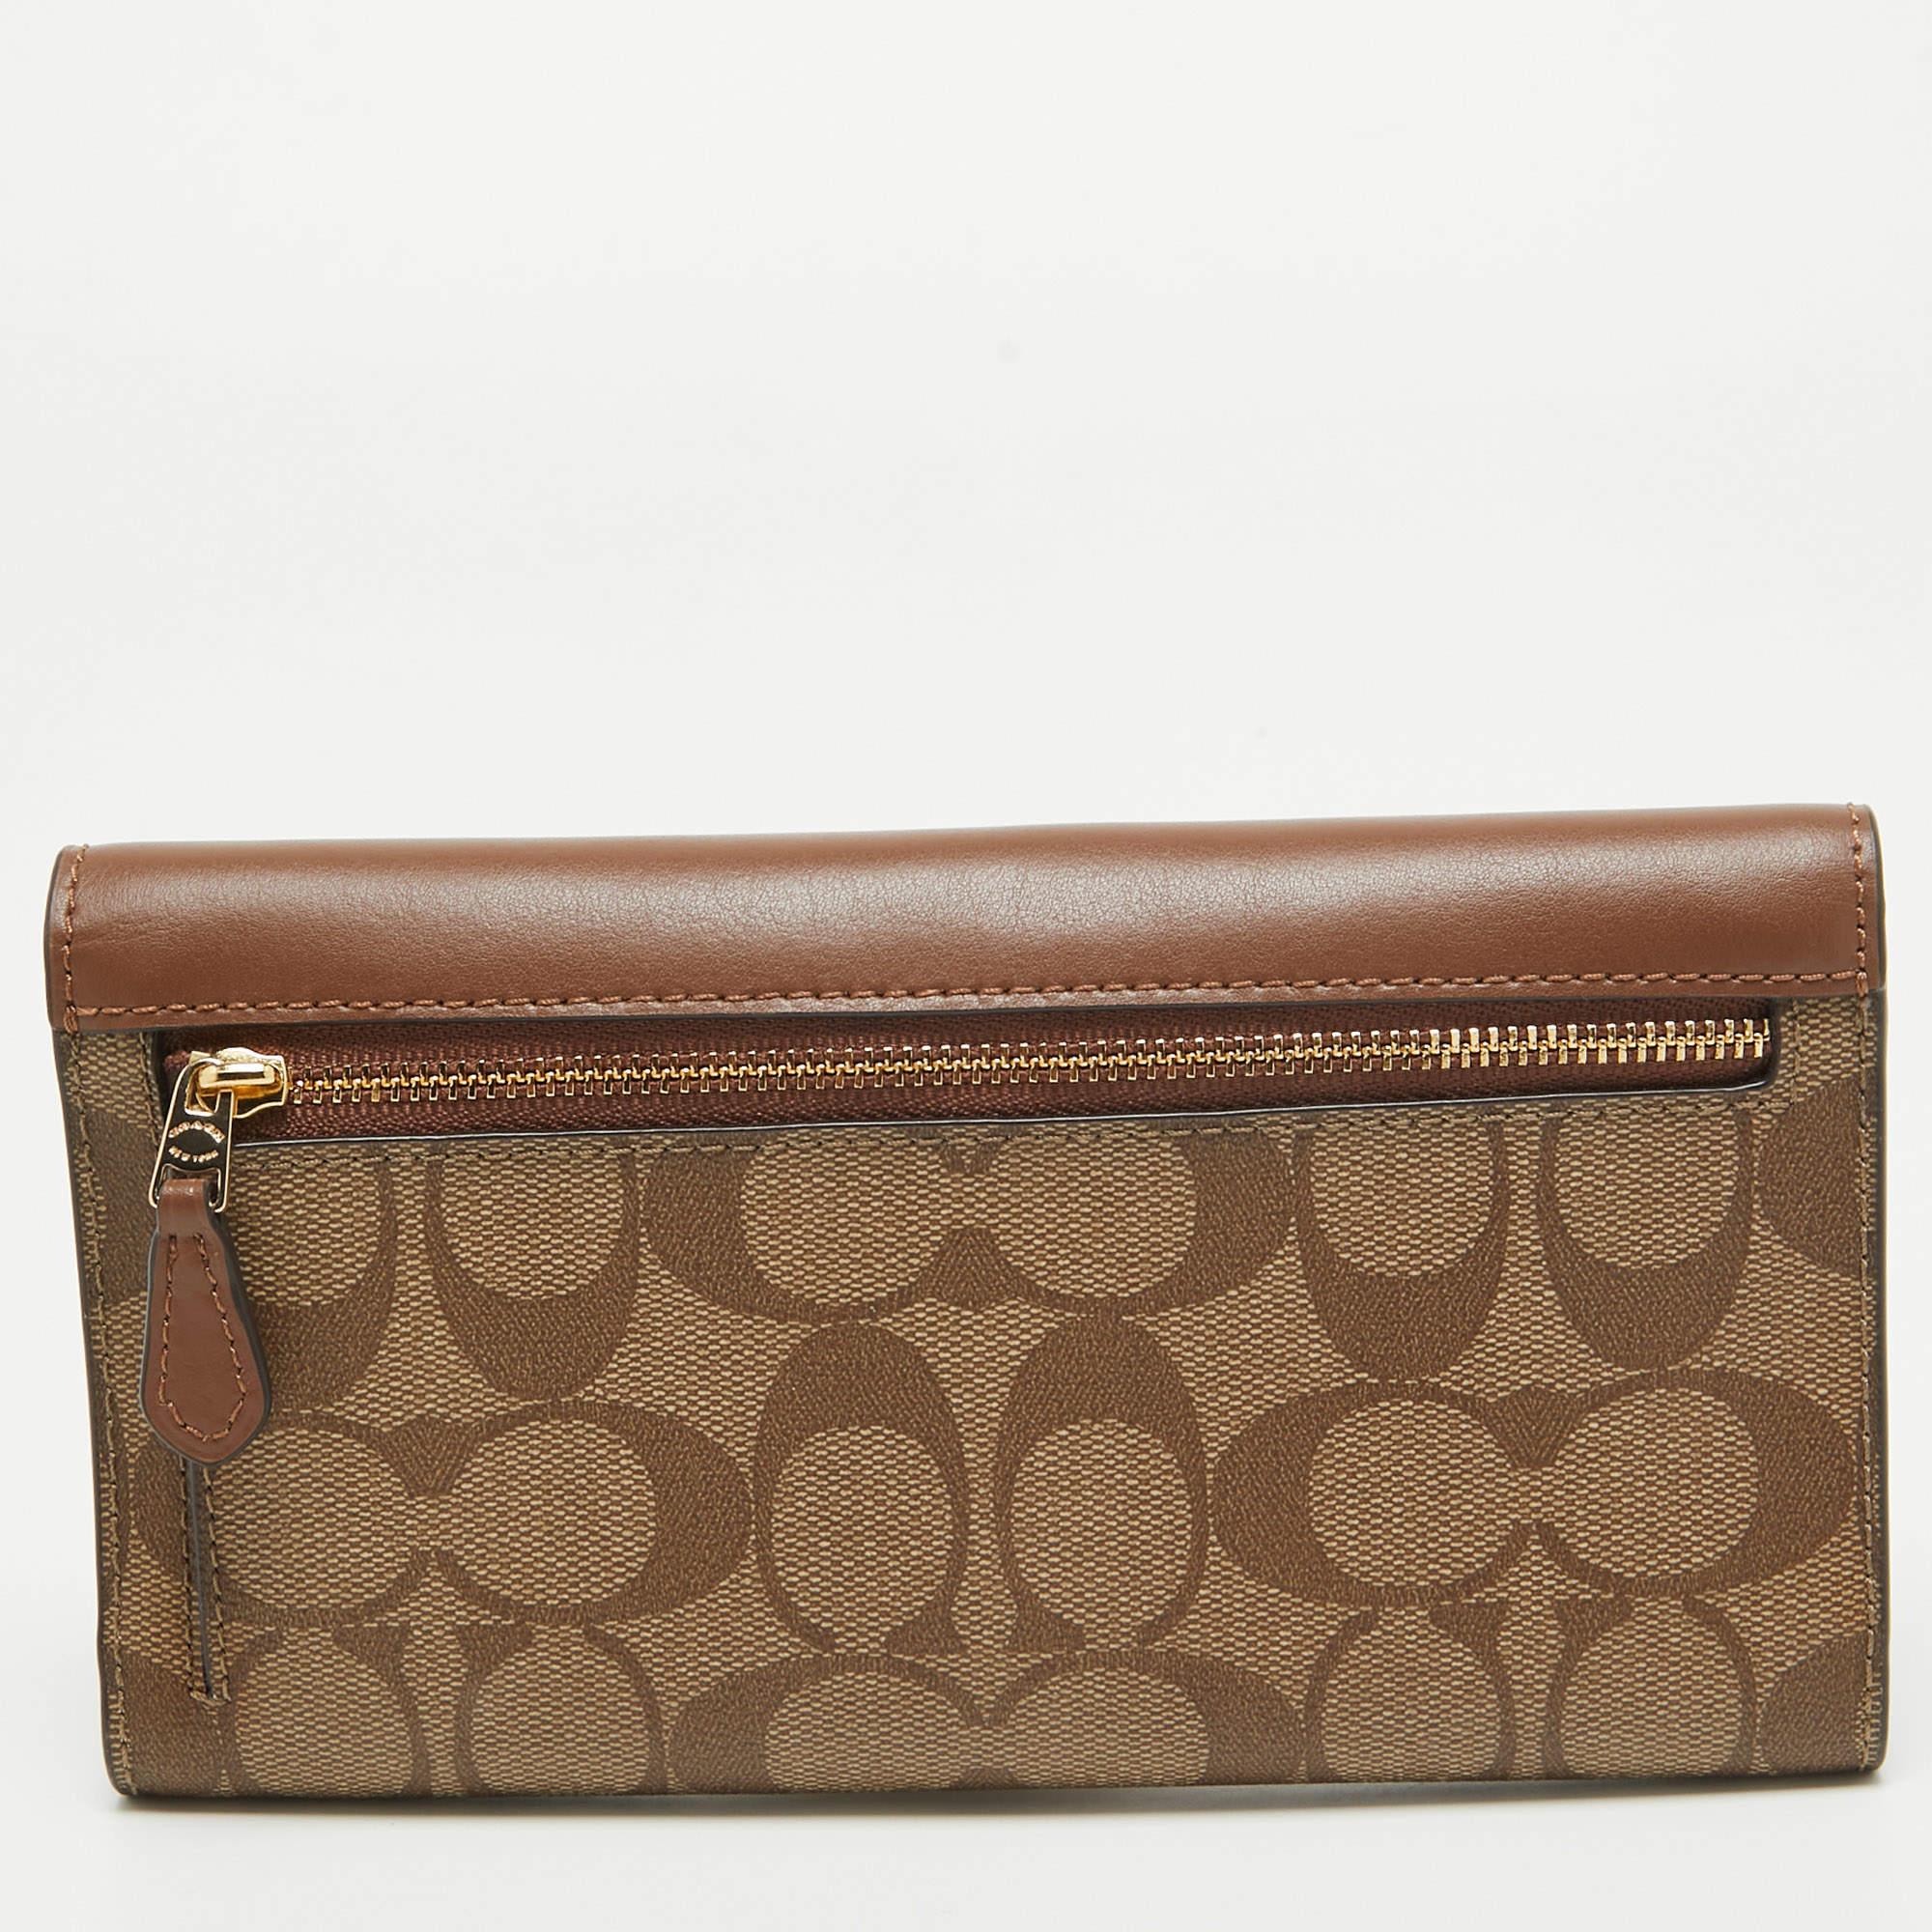 Coach Brown/Beige Signature Coated Canvas and Leather Trifold Long Wallet For Sale 3